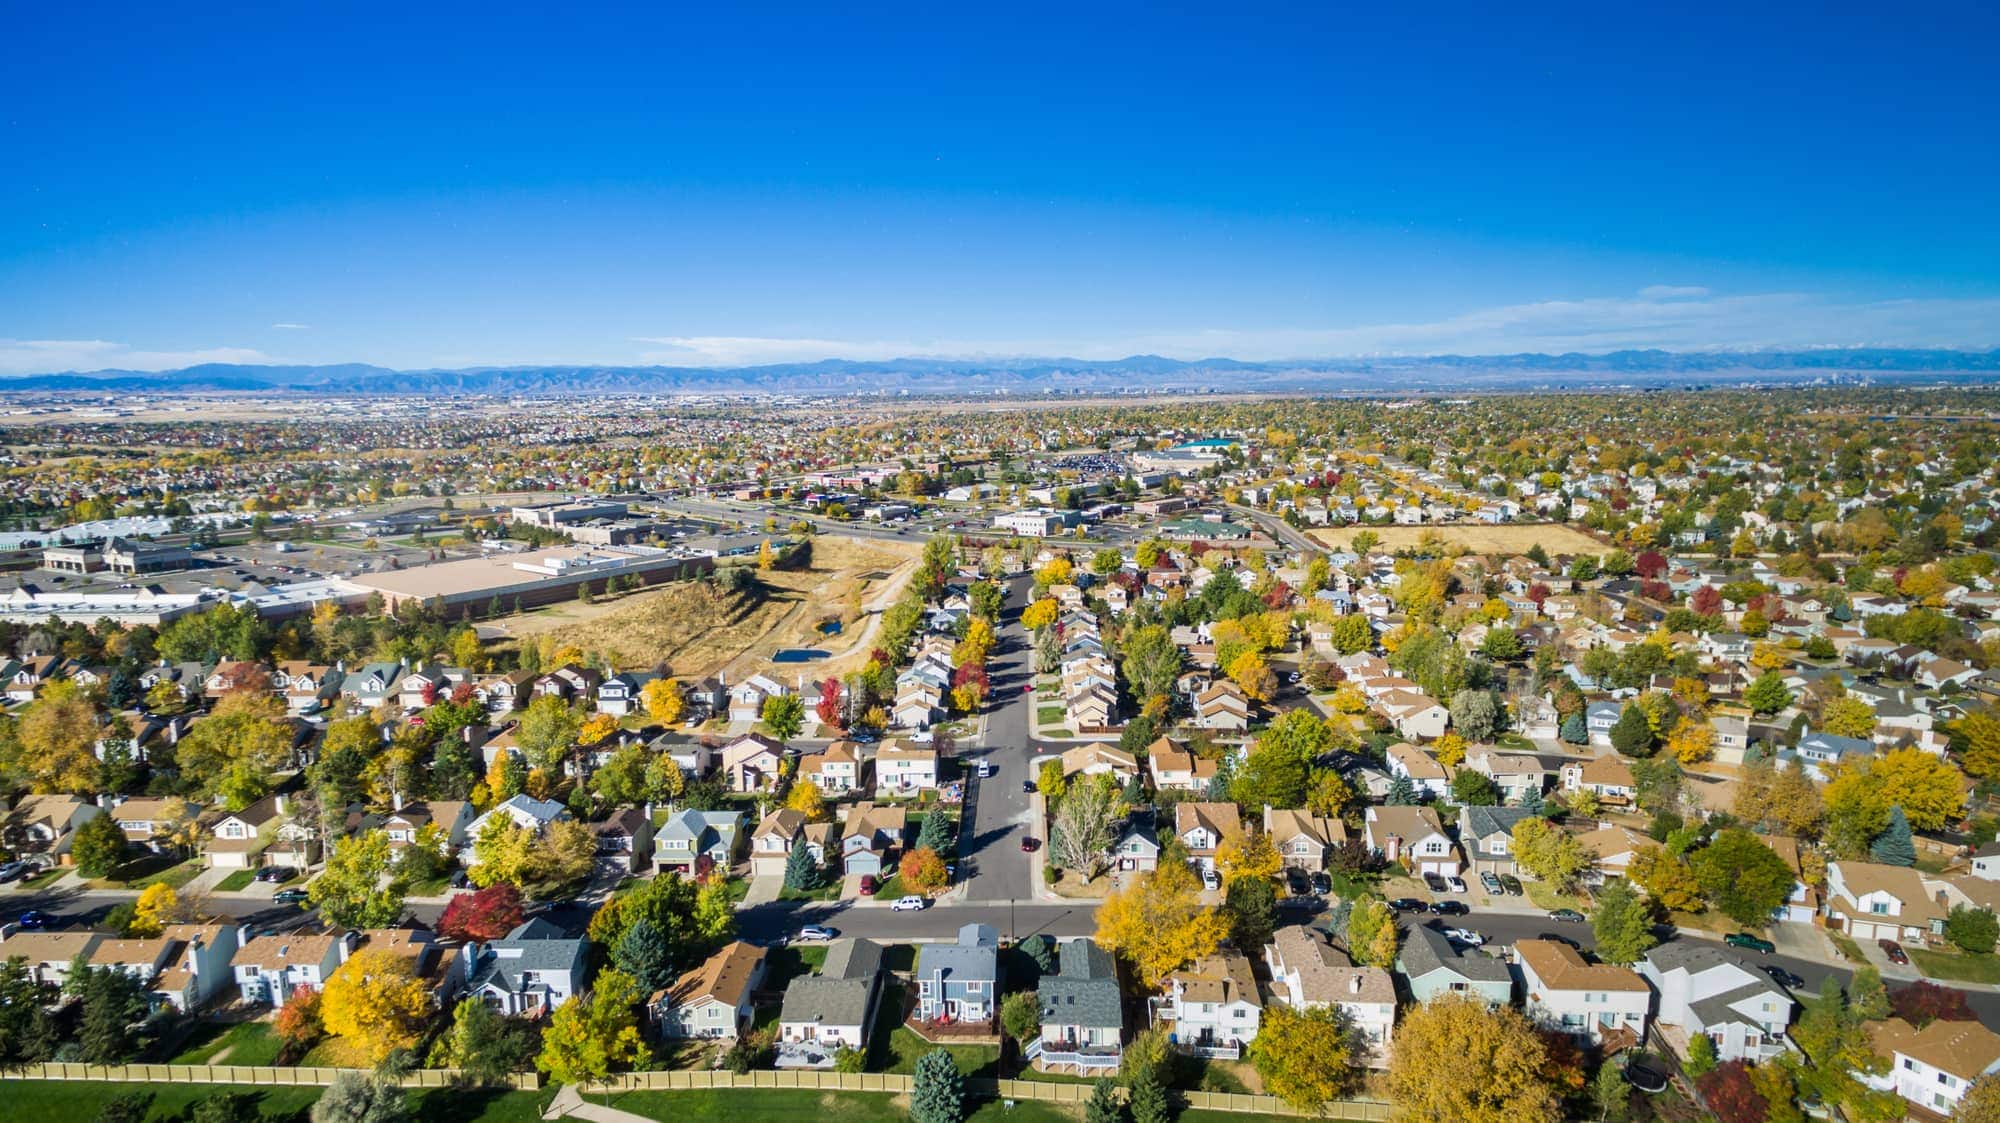 Moving to Aurora ON: 2023 Home Buying & Relocation Guide